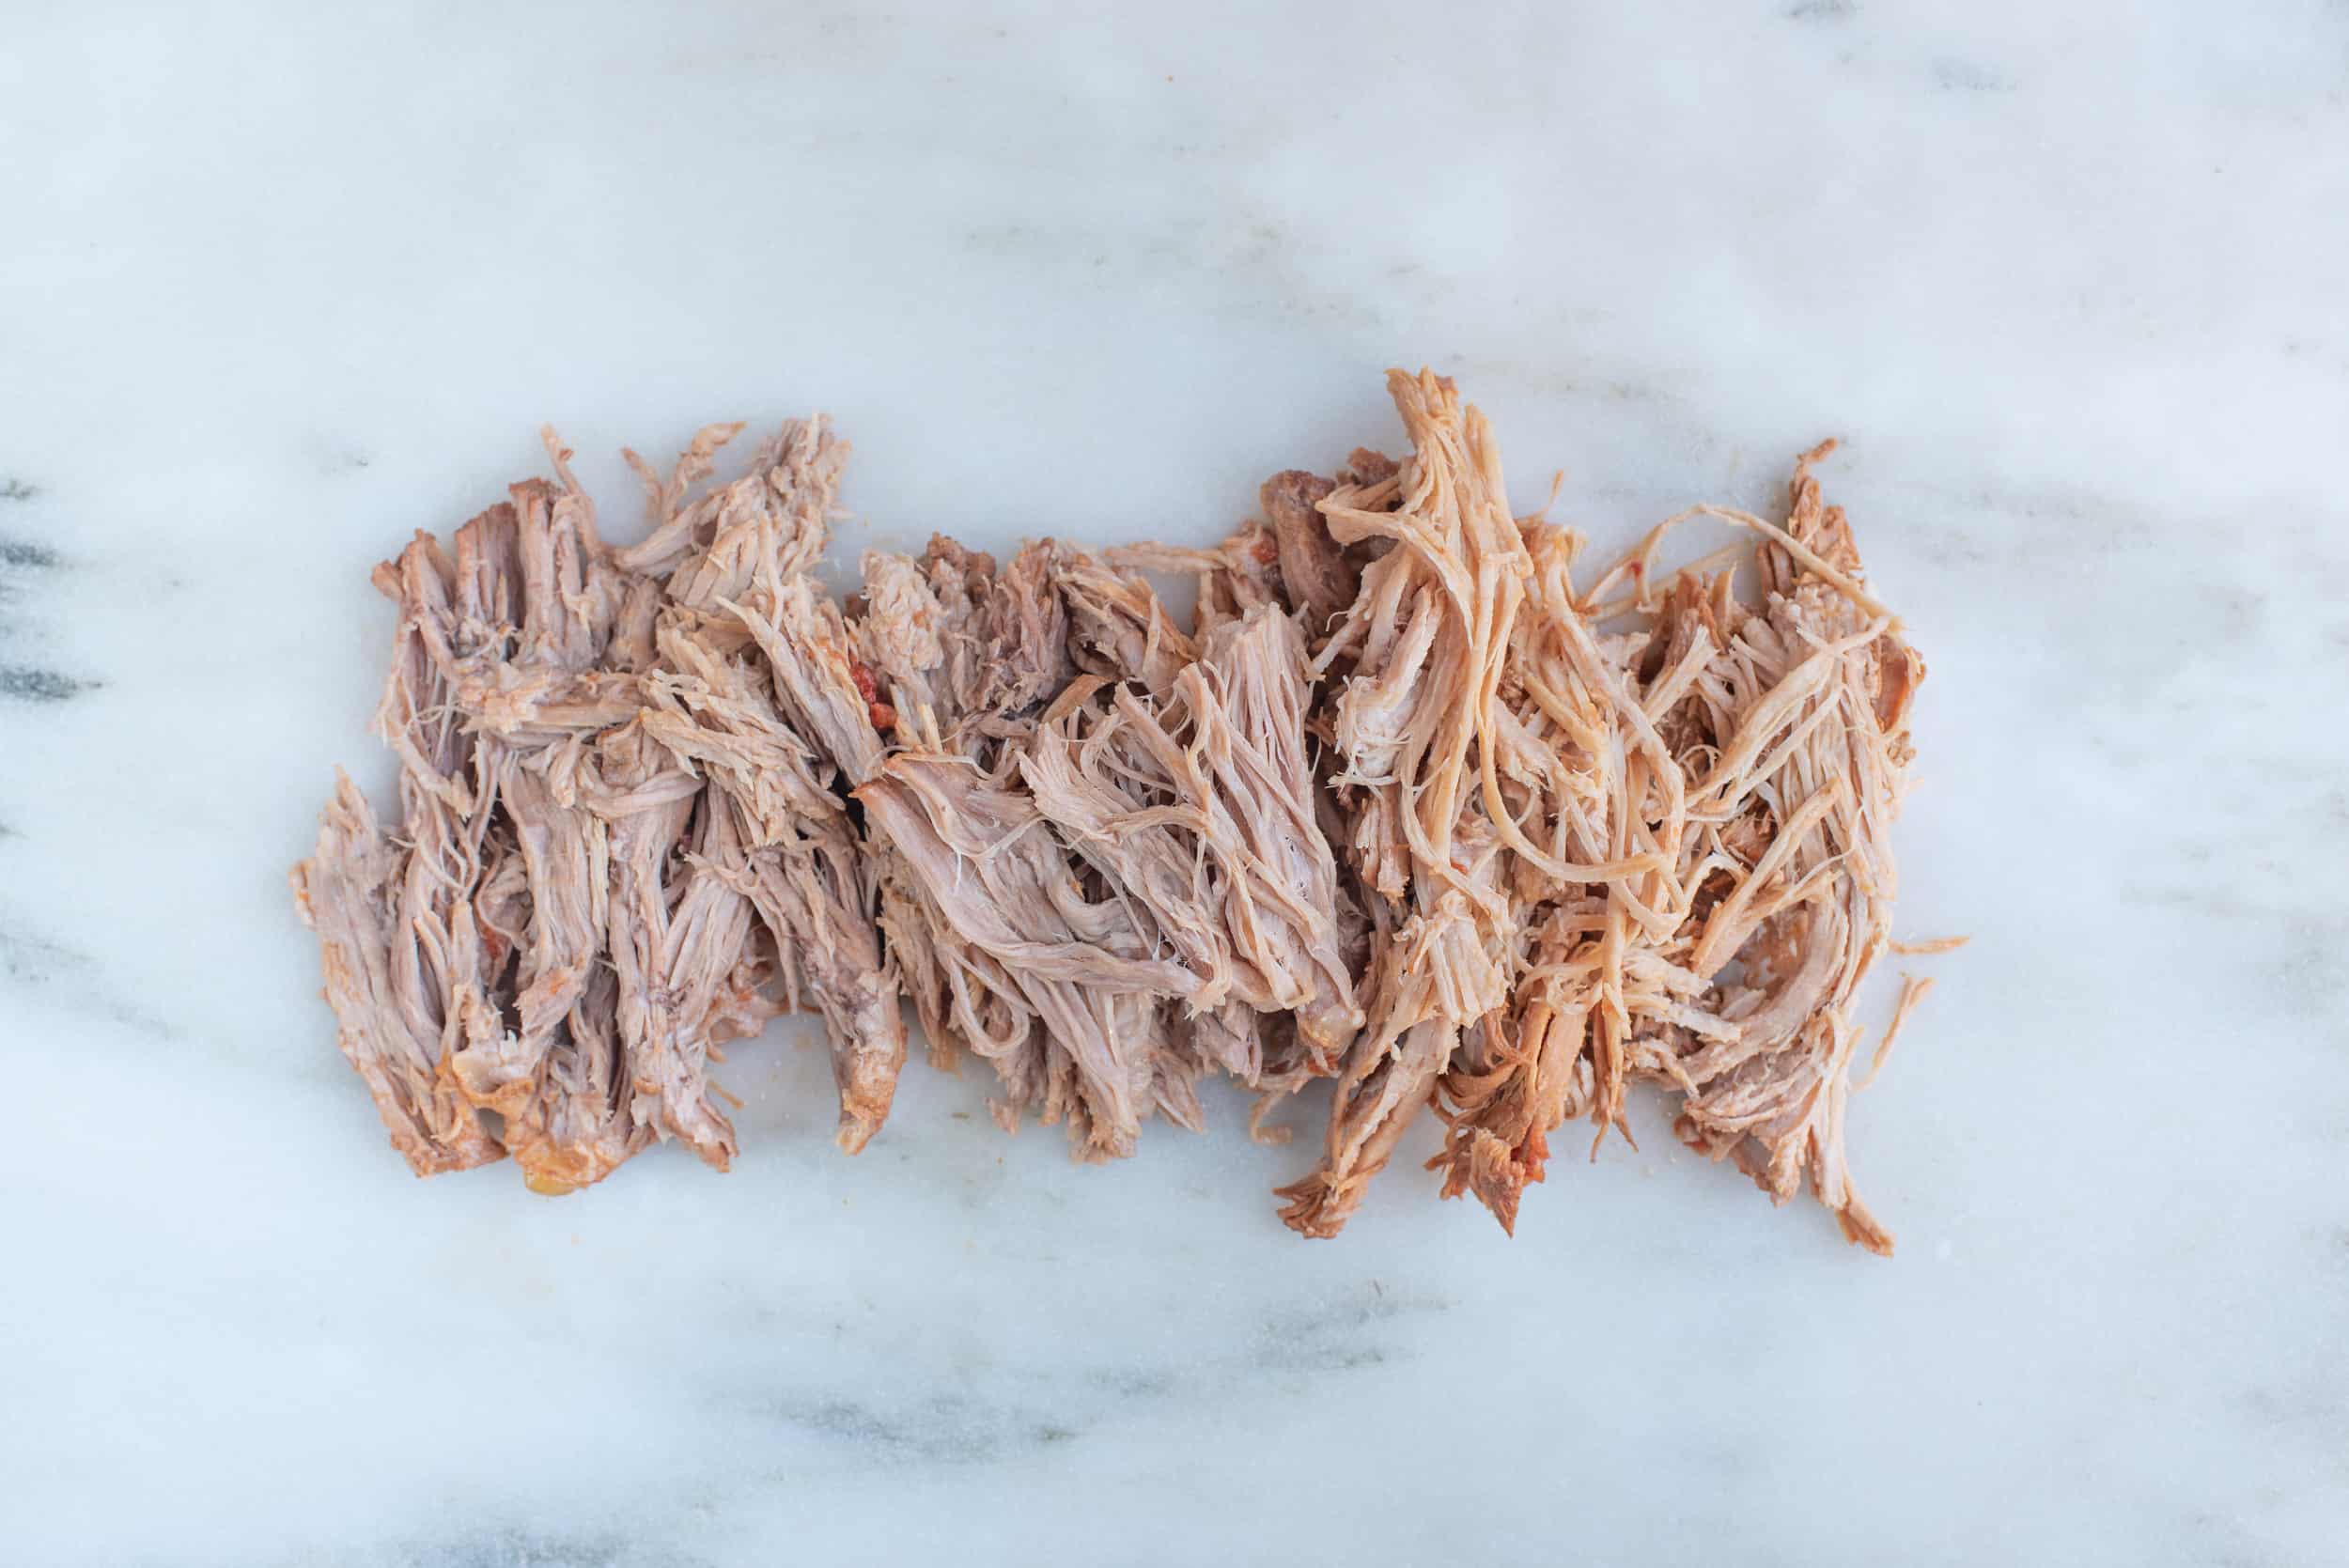 shreds of pulled pork spread out on a white background for babies starting solids